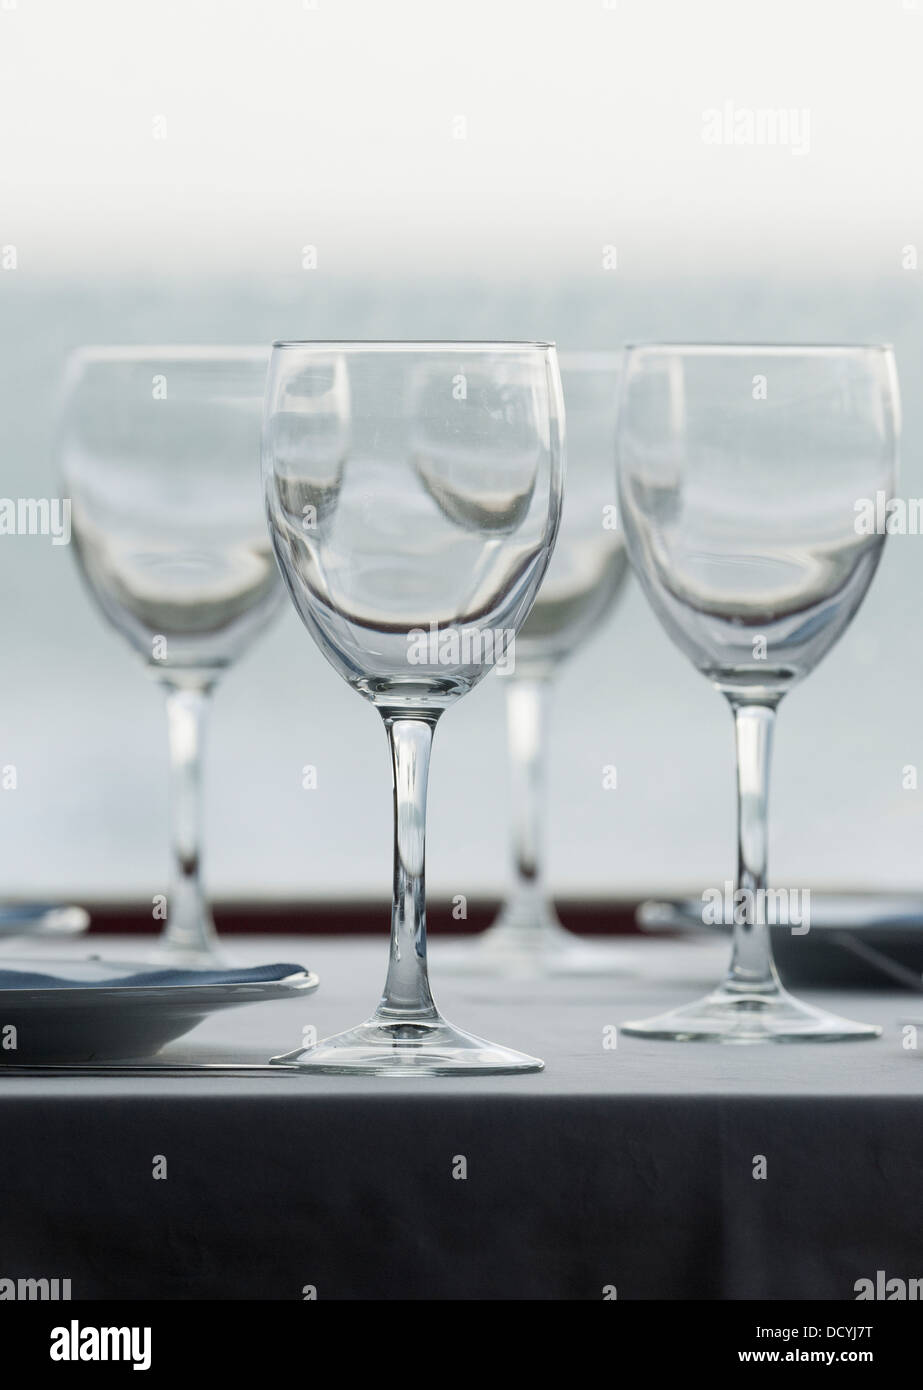 Close-Up Of Four Wine Glasses Stock Photo